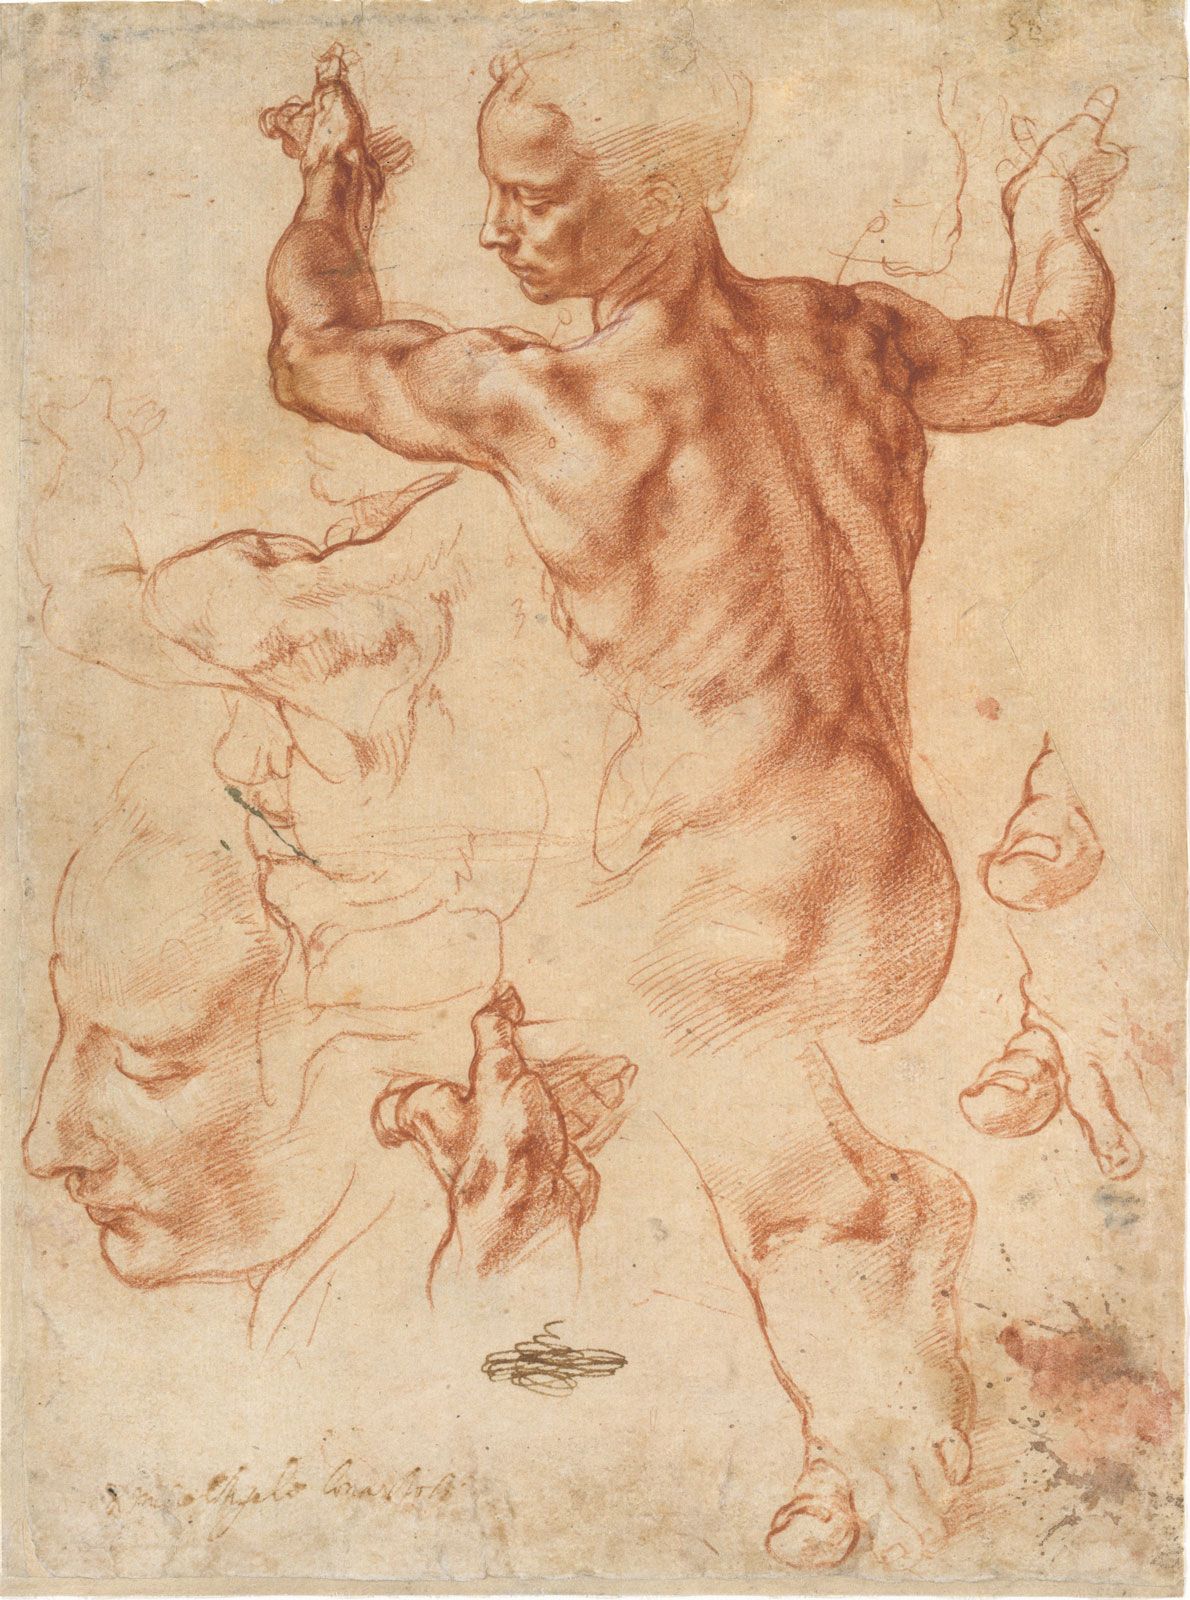 Michelangelo Exploded Art History, Just With His Drawing